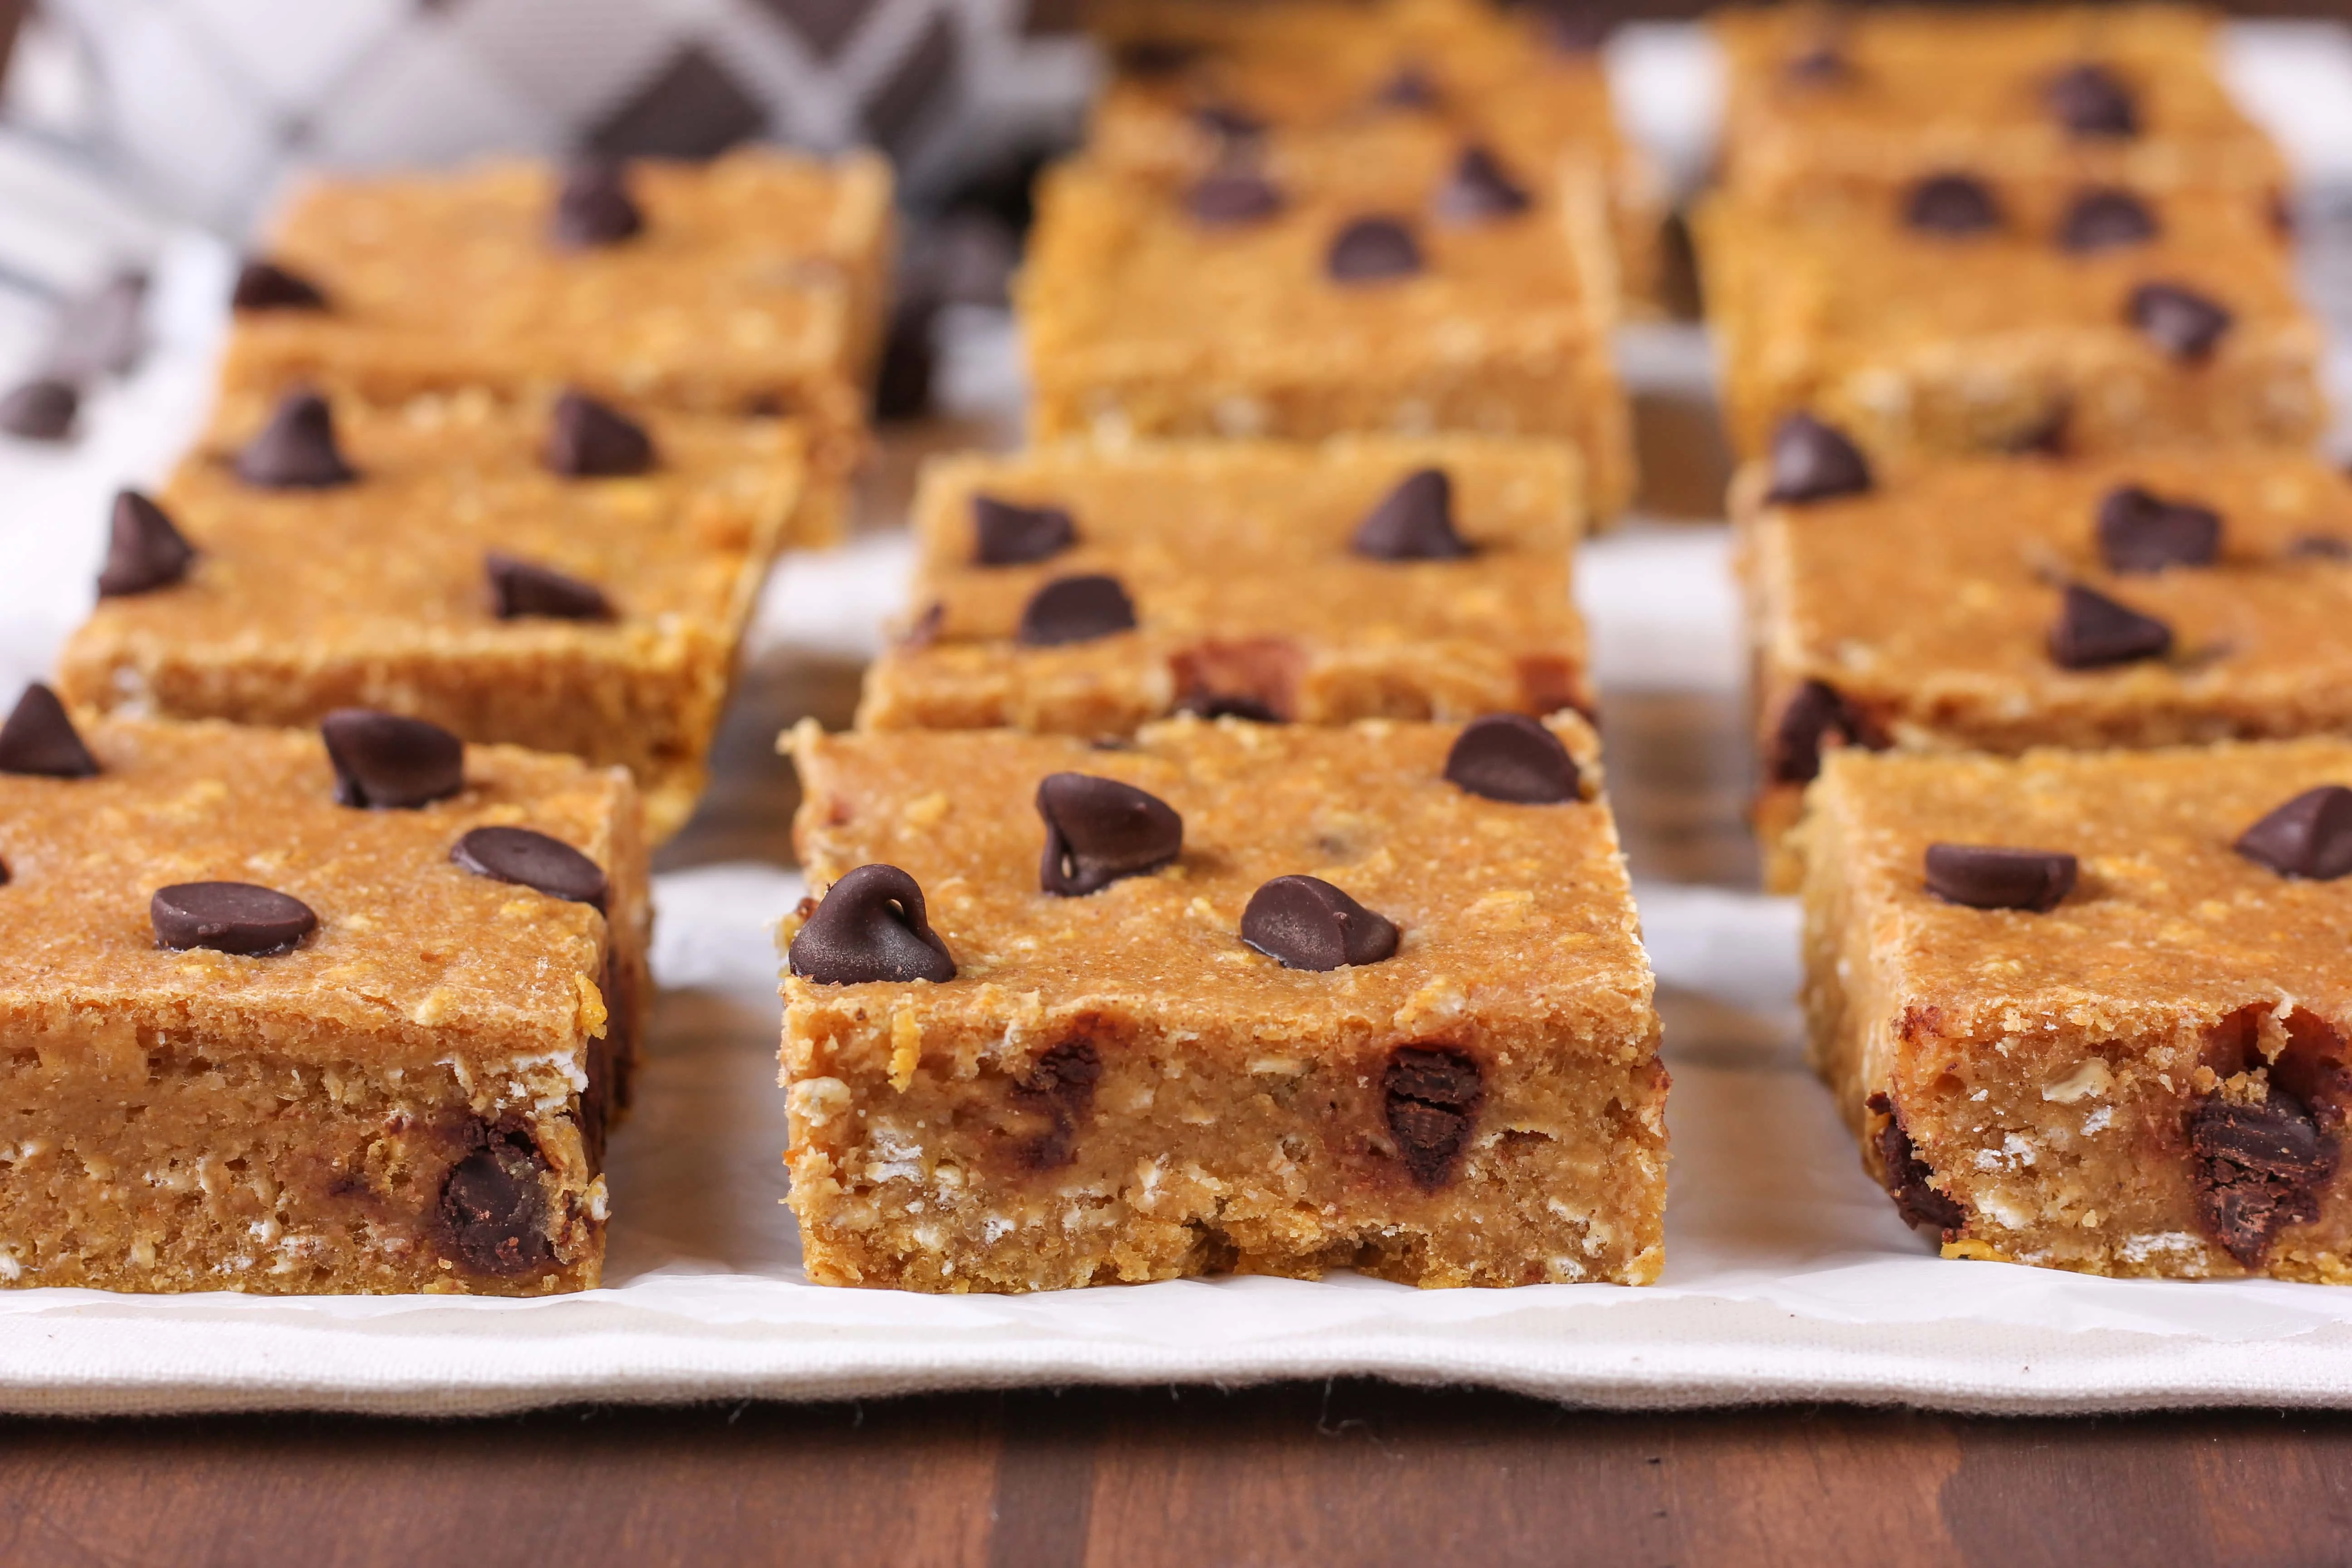 Chocolate Chip Pumpkin Snack Bars Recipe from A Kitchen Addiction